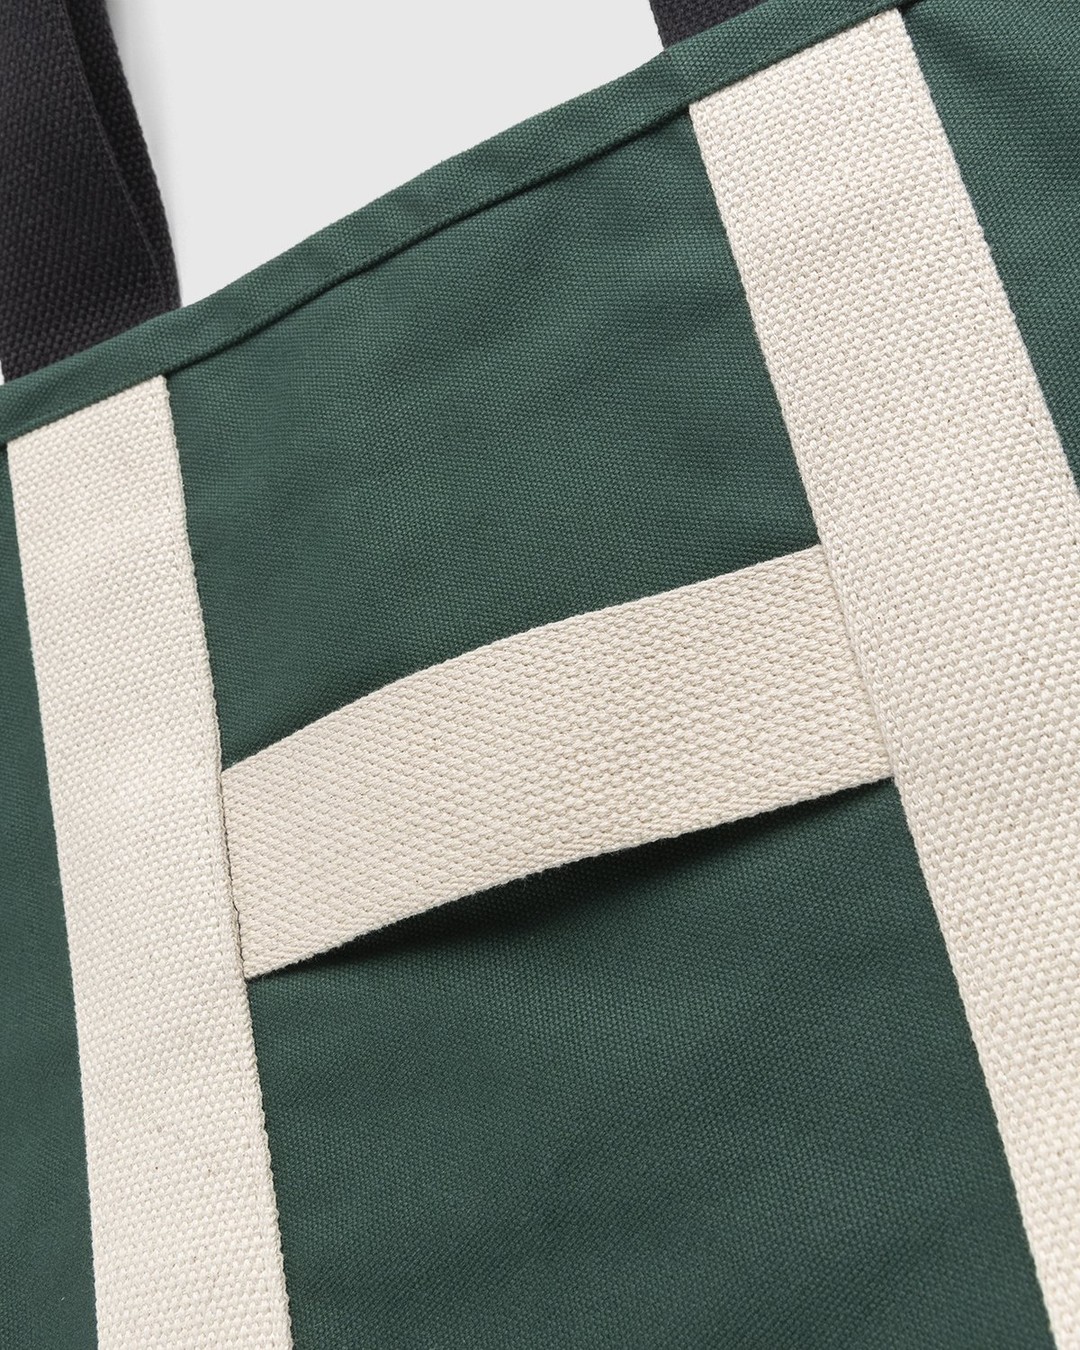 Highsnobiety – Large Staples Tote Bag Green - Tote Bags - Green - Image 4